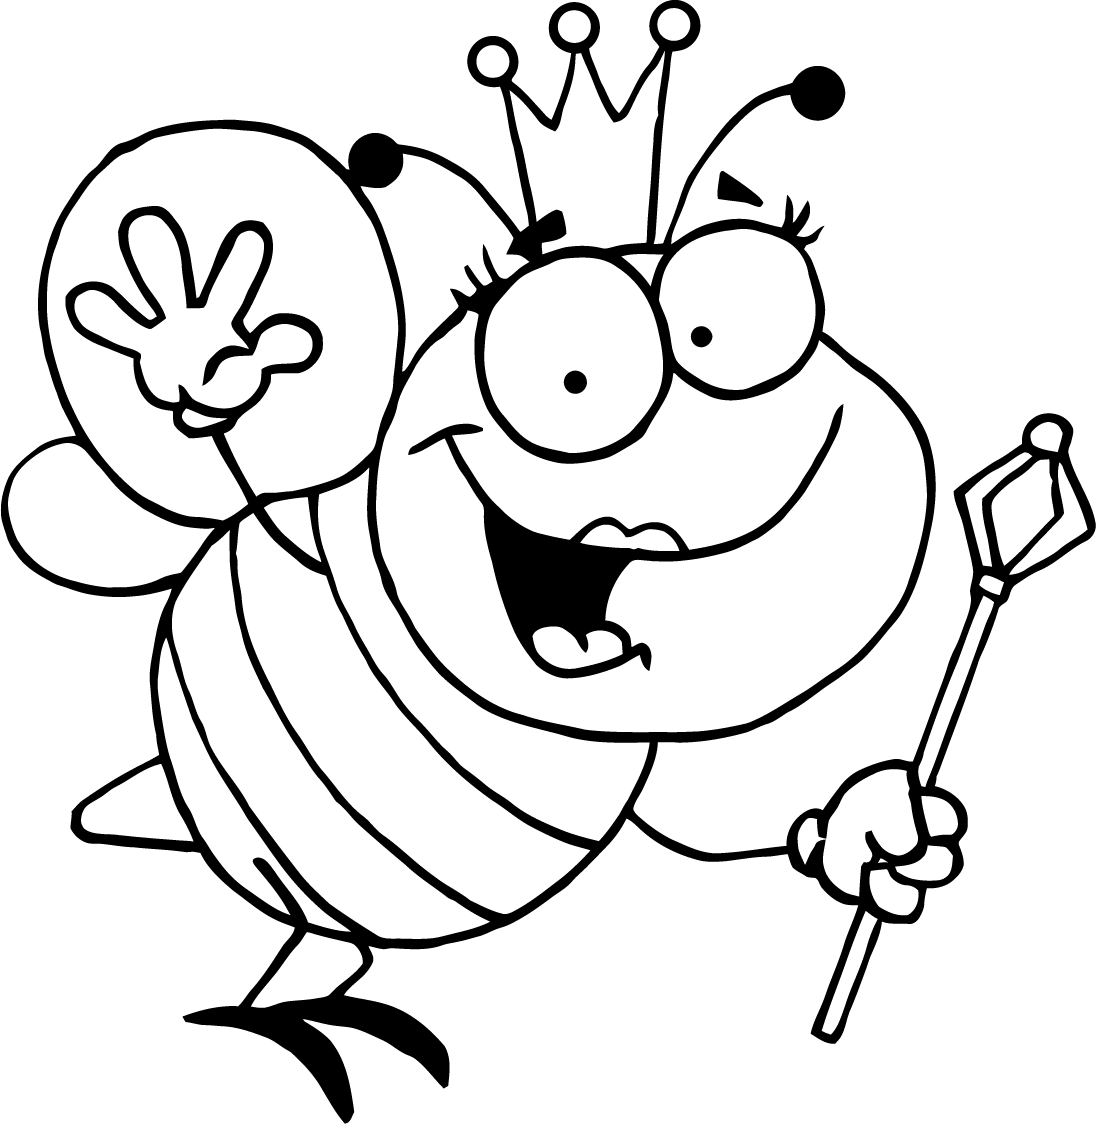 Black and White Bumble Bee Coloring Pages bumble bee sheets free Printable Coloring4free